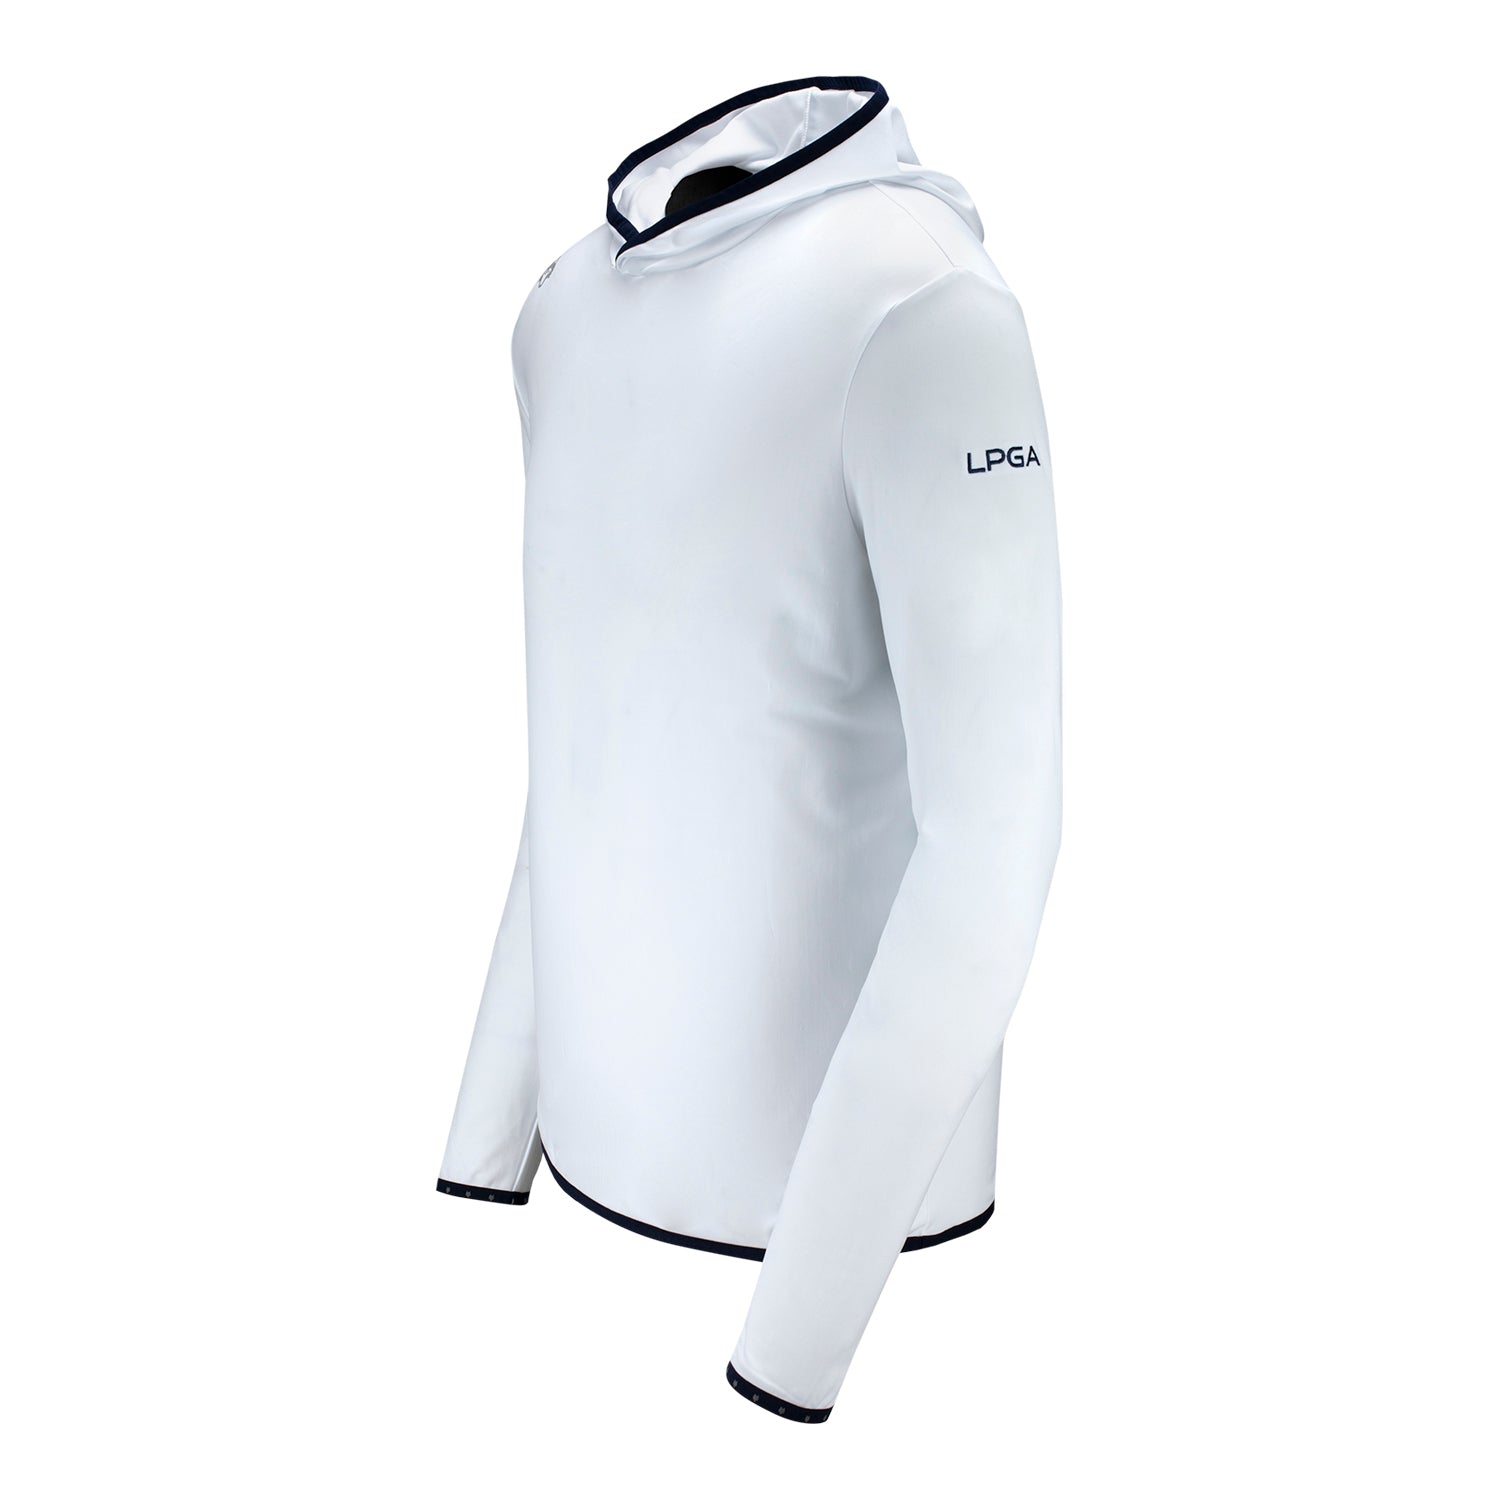 Greyson Clothiers 2023 LPGA Men's Colorado Golf Hoodie in White - Angled Left Side View